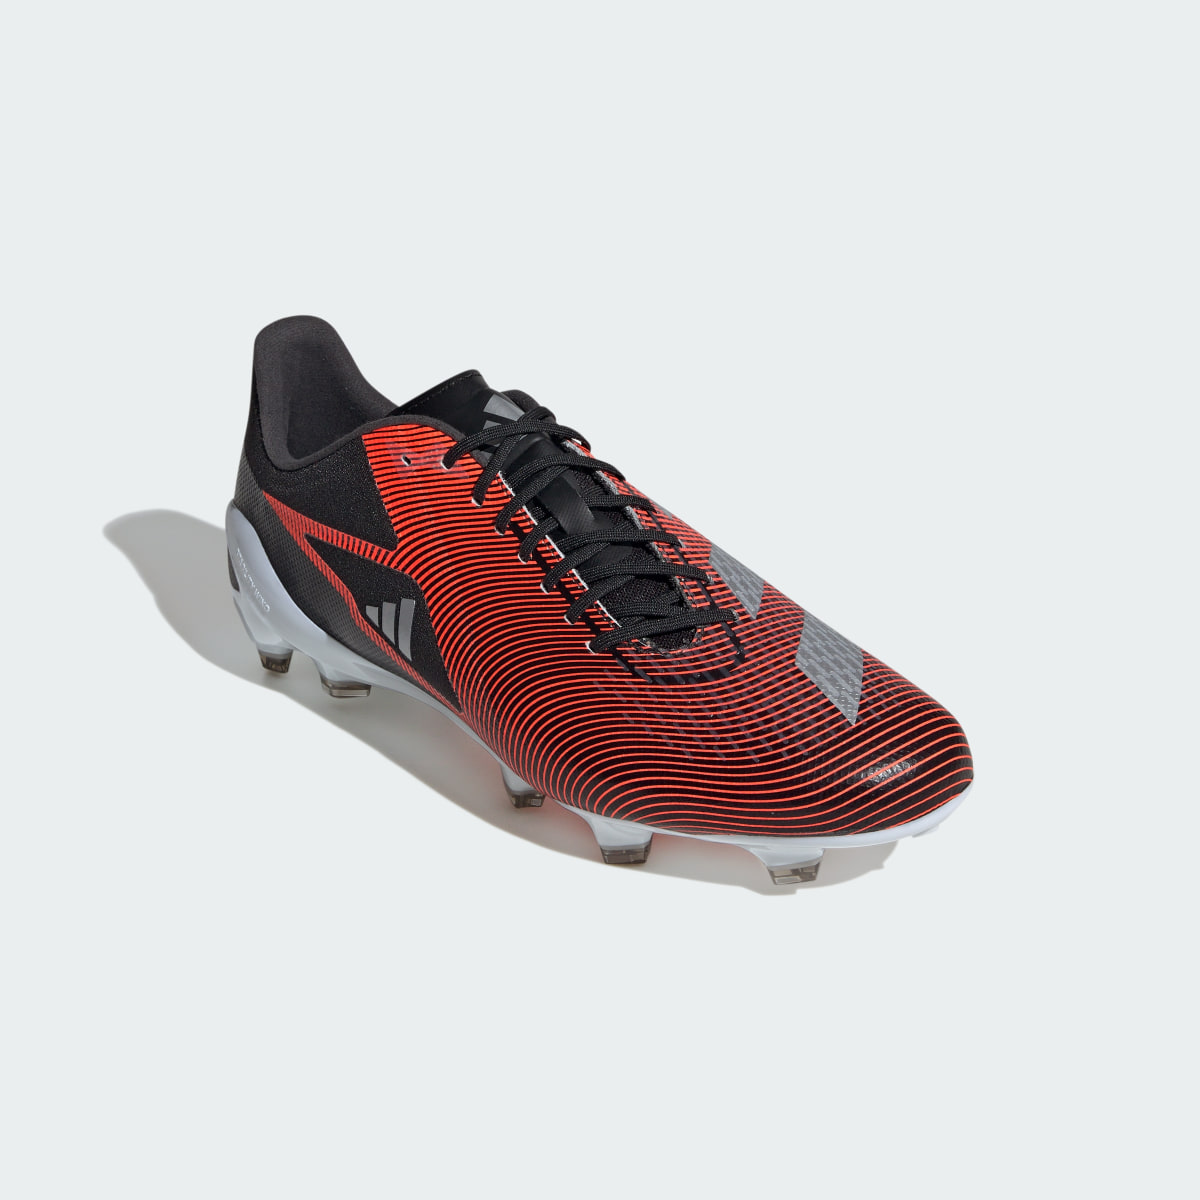 Adidas Adizero RS15 Pro Firm Ground Rugby Boots. 9